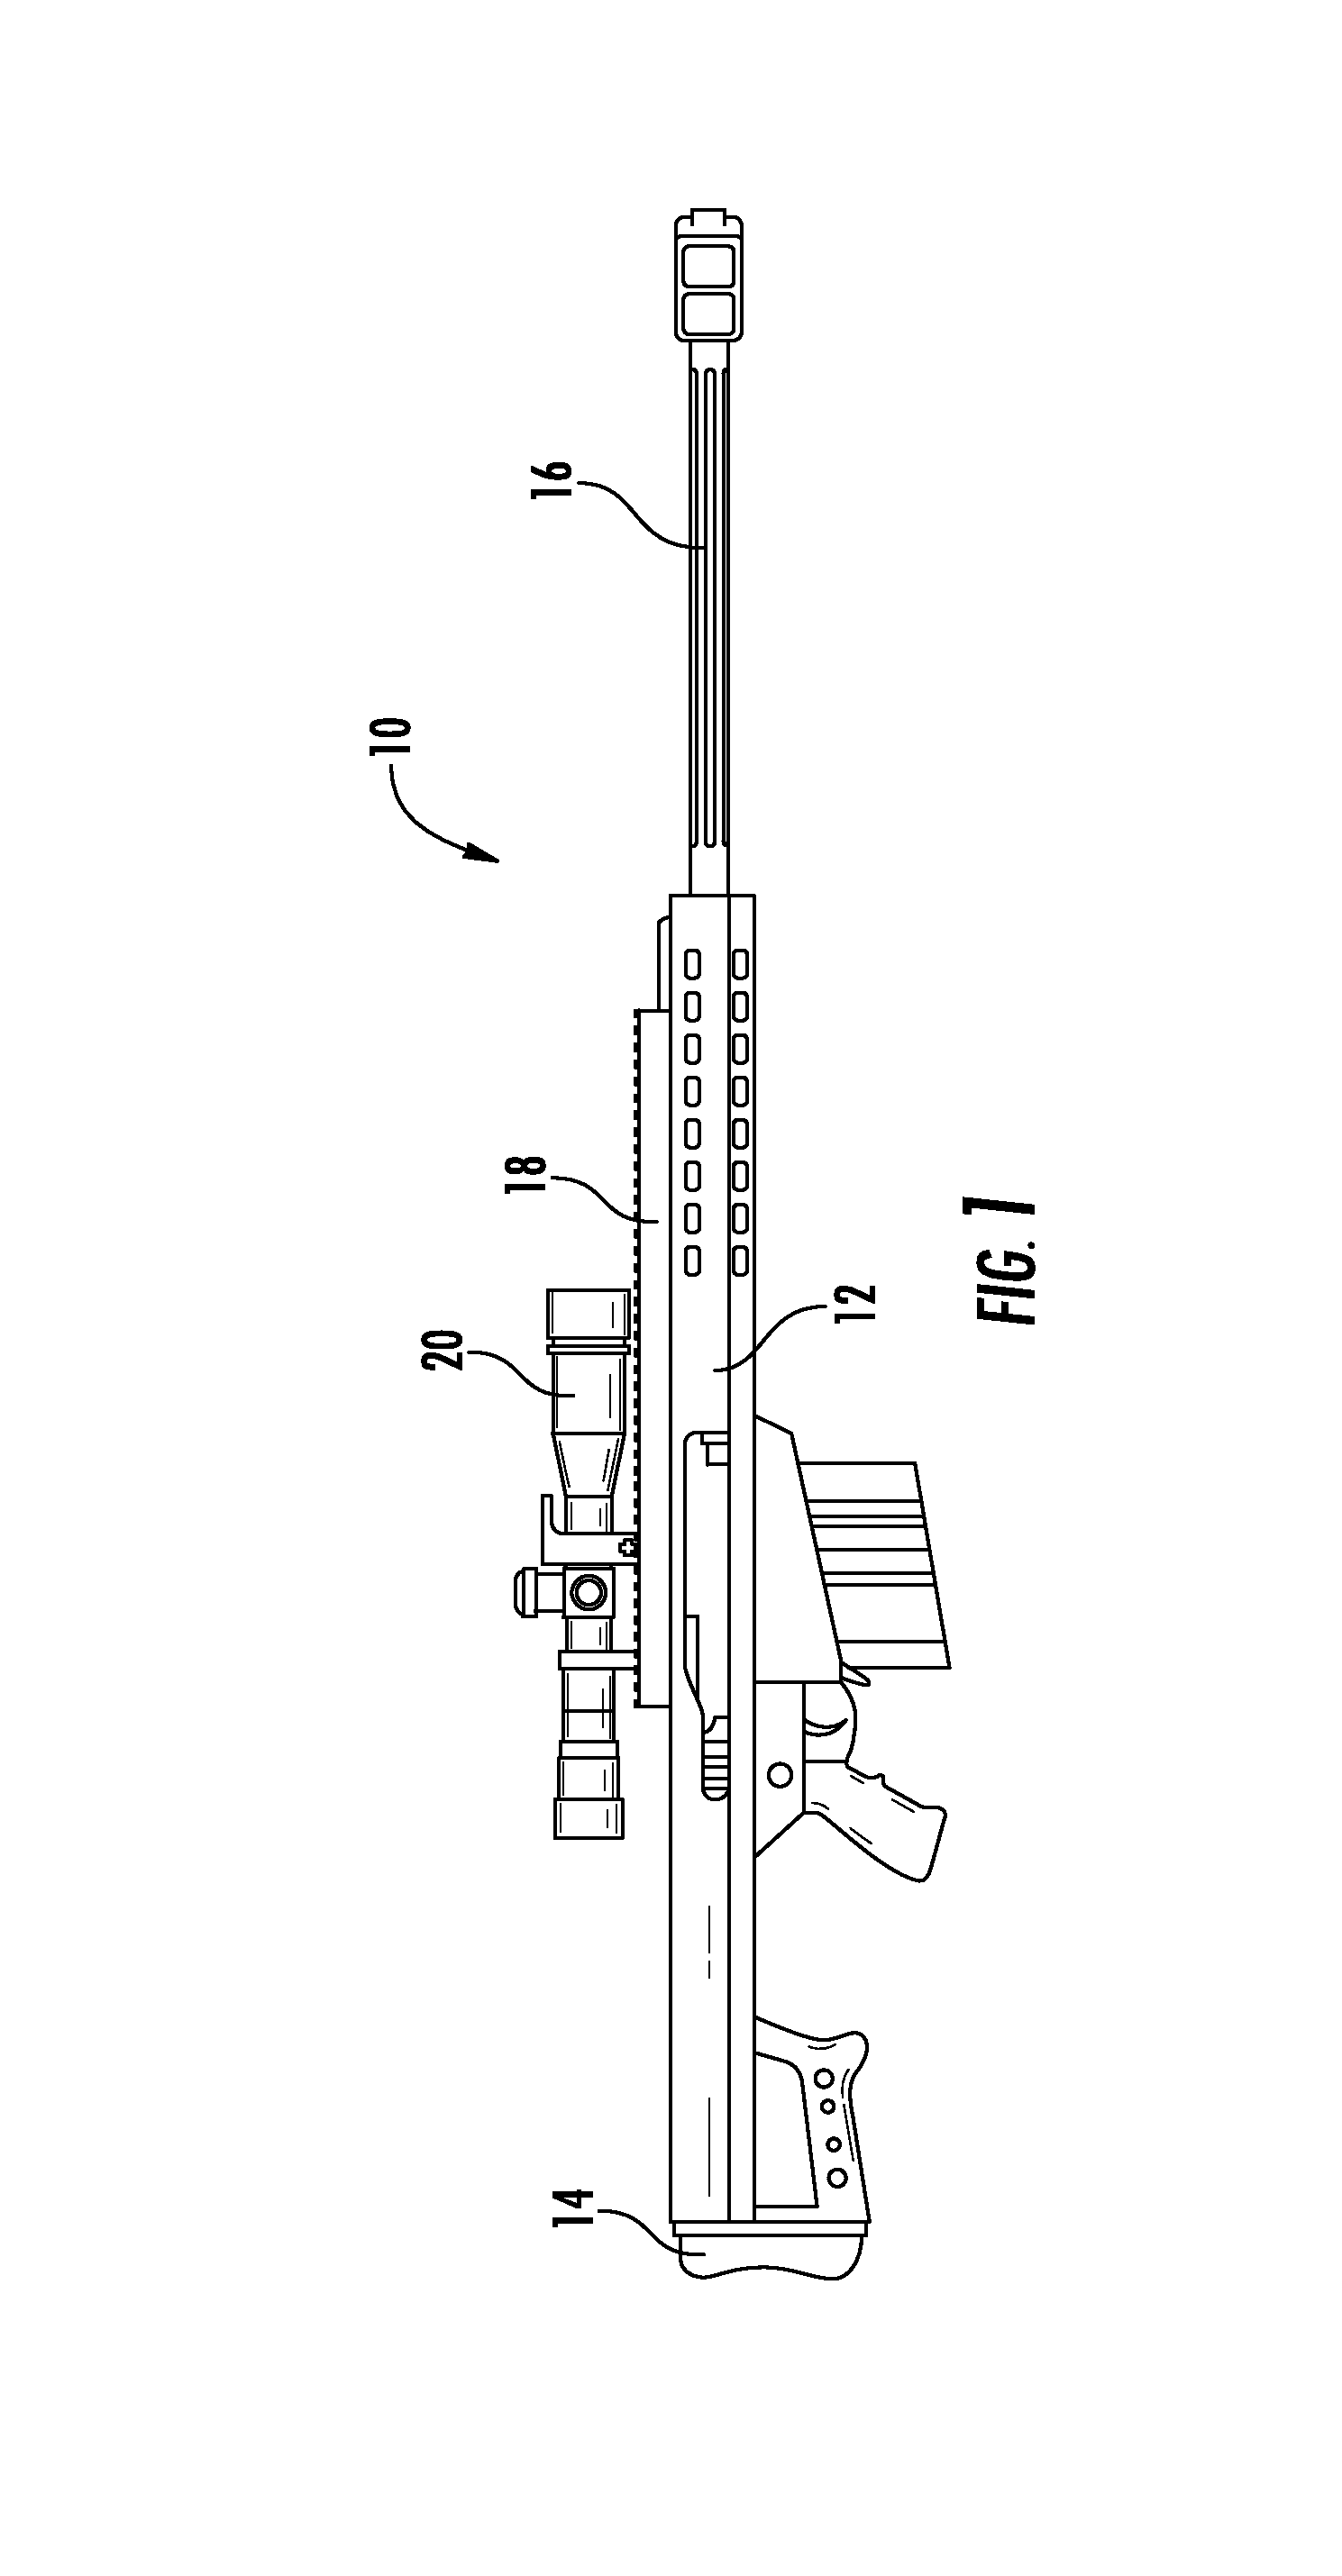 Modular integrated rail system including a dampening device